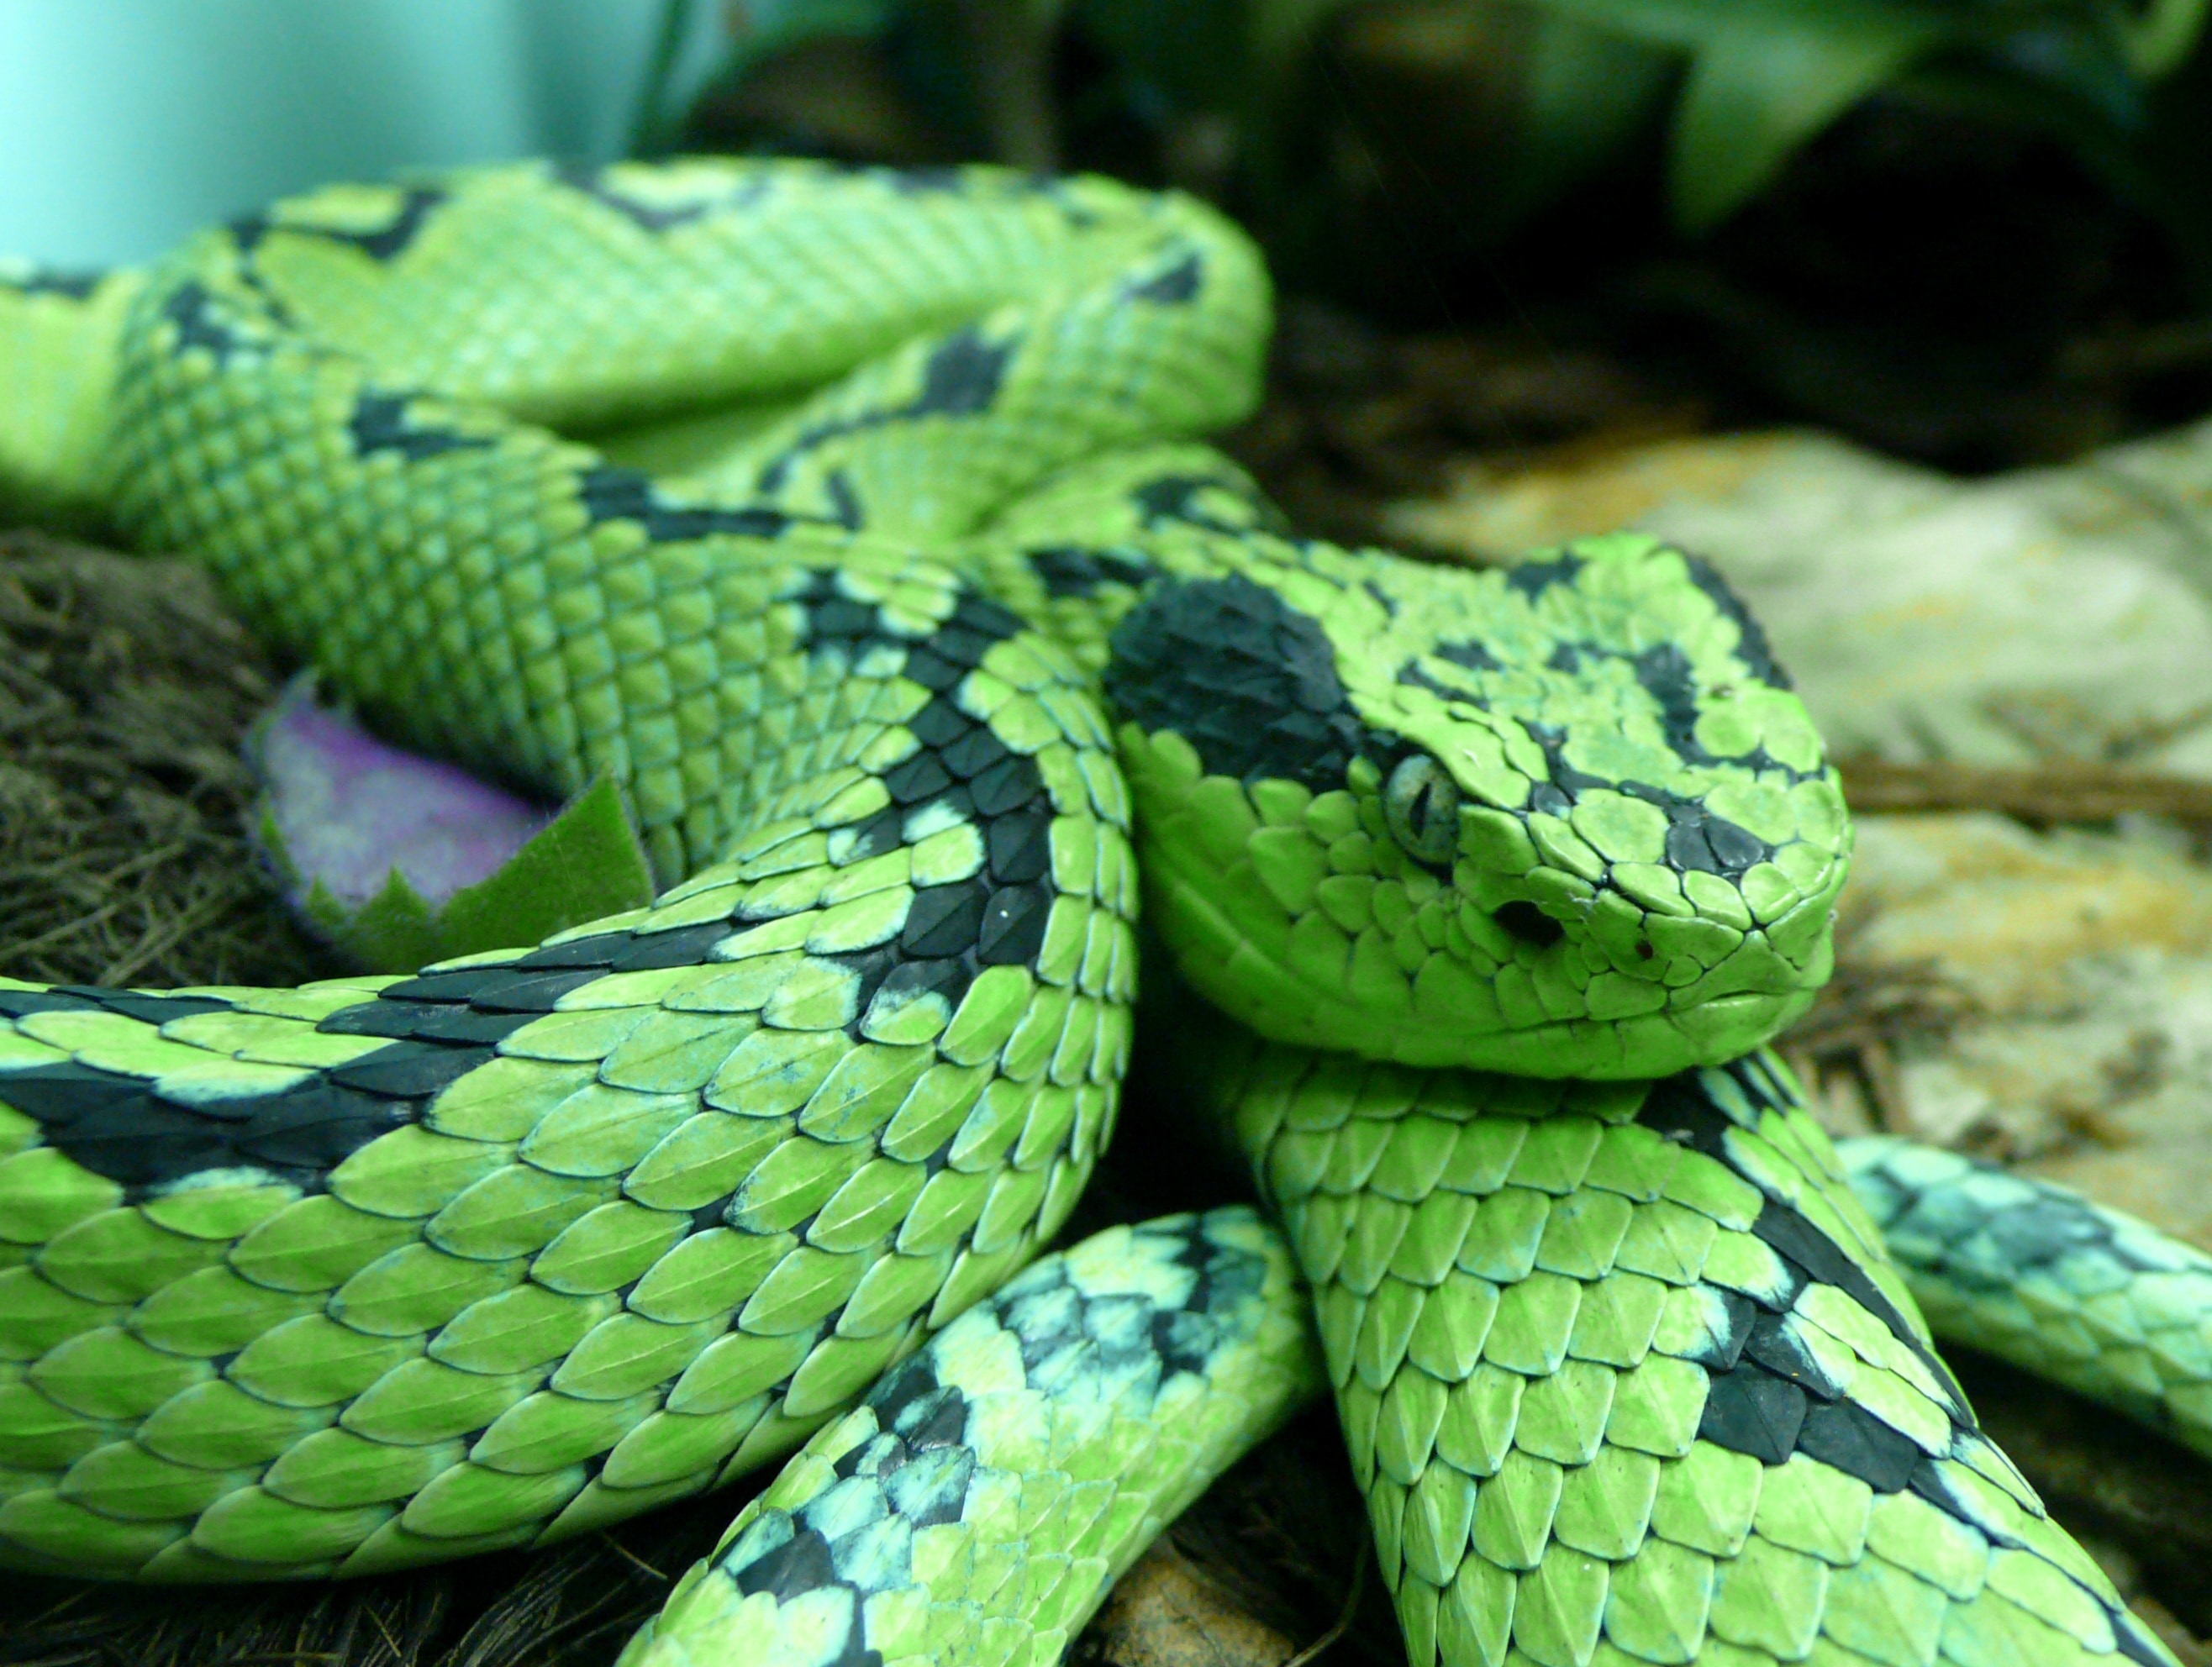 Yellow Blotched Palm Pitviper, Snake, snake, green color